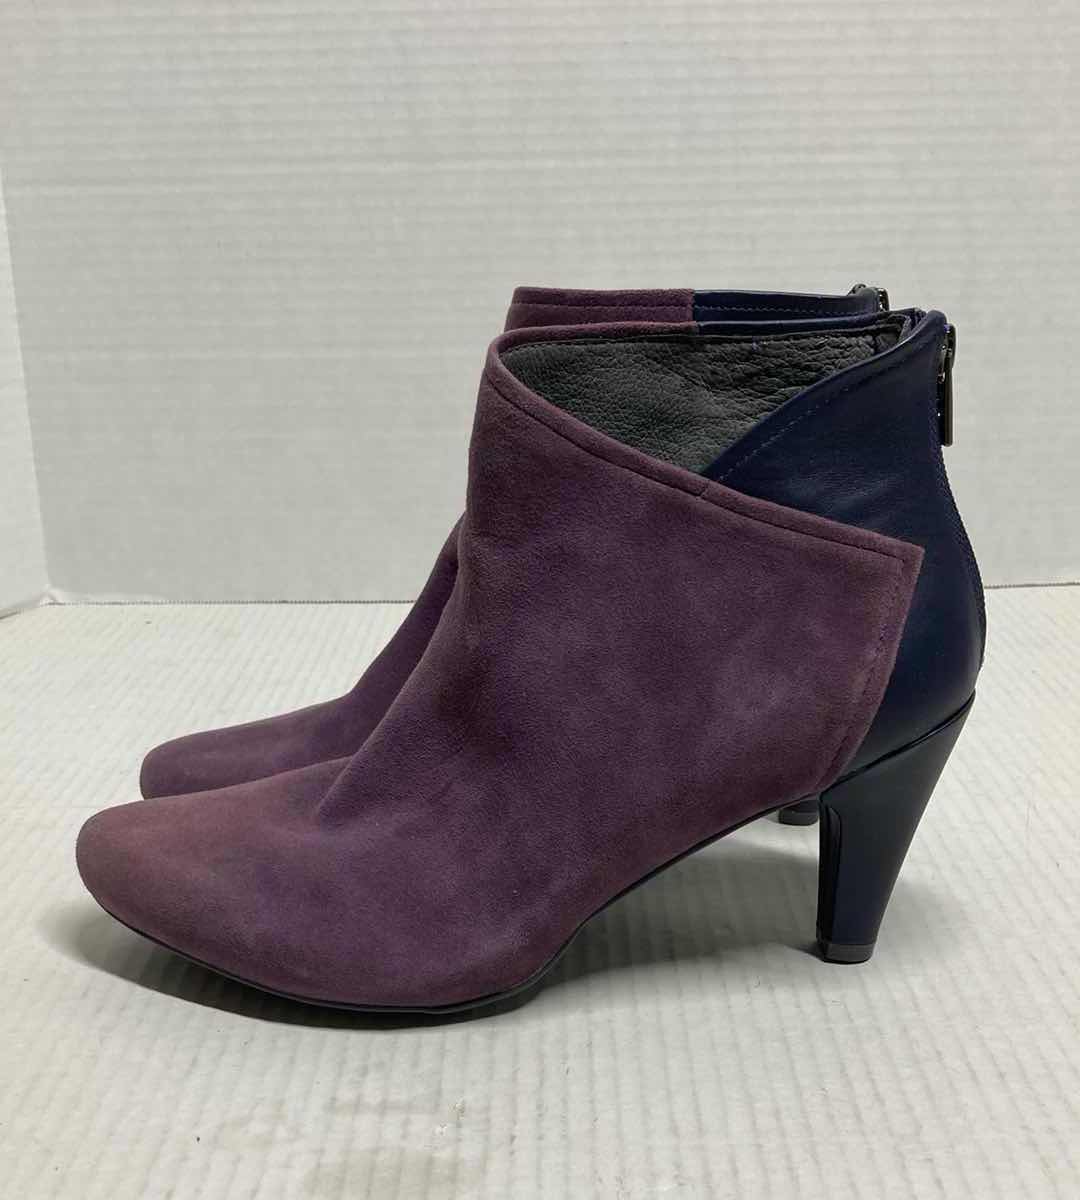 Photo 3 of TSUBO PURPLE & BLUE SUEDE LEATHER ANKLE HEEL BOOTS WOMAN’S SIZE 9